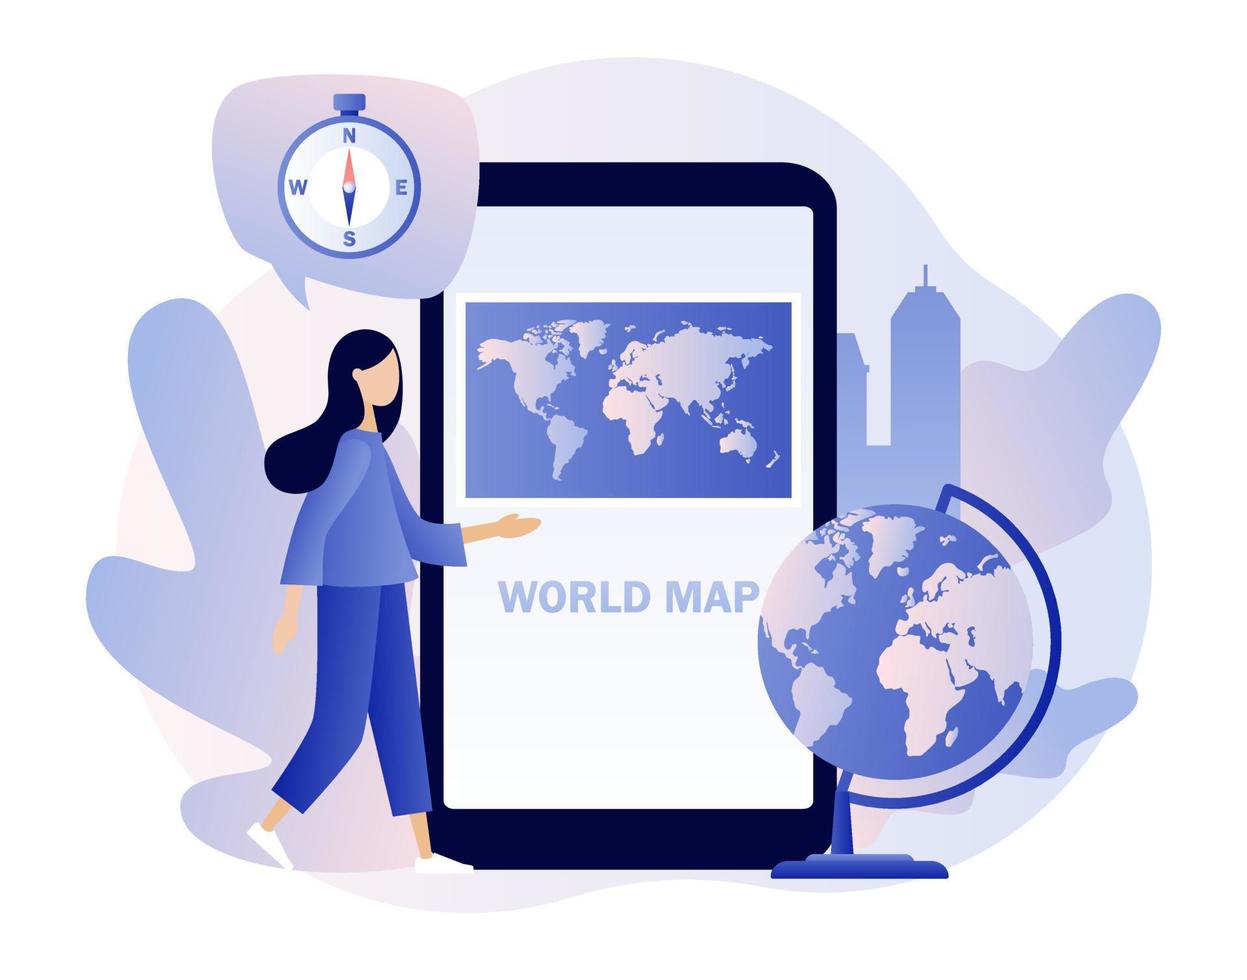 World map. Geography concept. Tiny girl studies atlas Earth in app on smartphone screen. Globalisation. Modern flat cartoon style. Vector illustration on white background